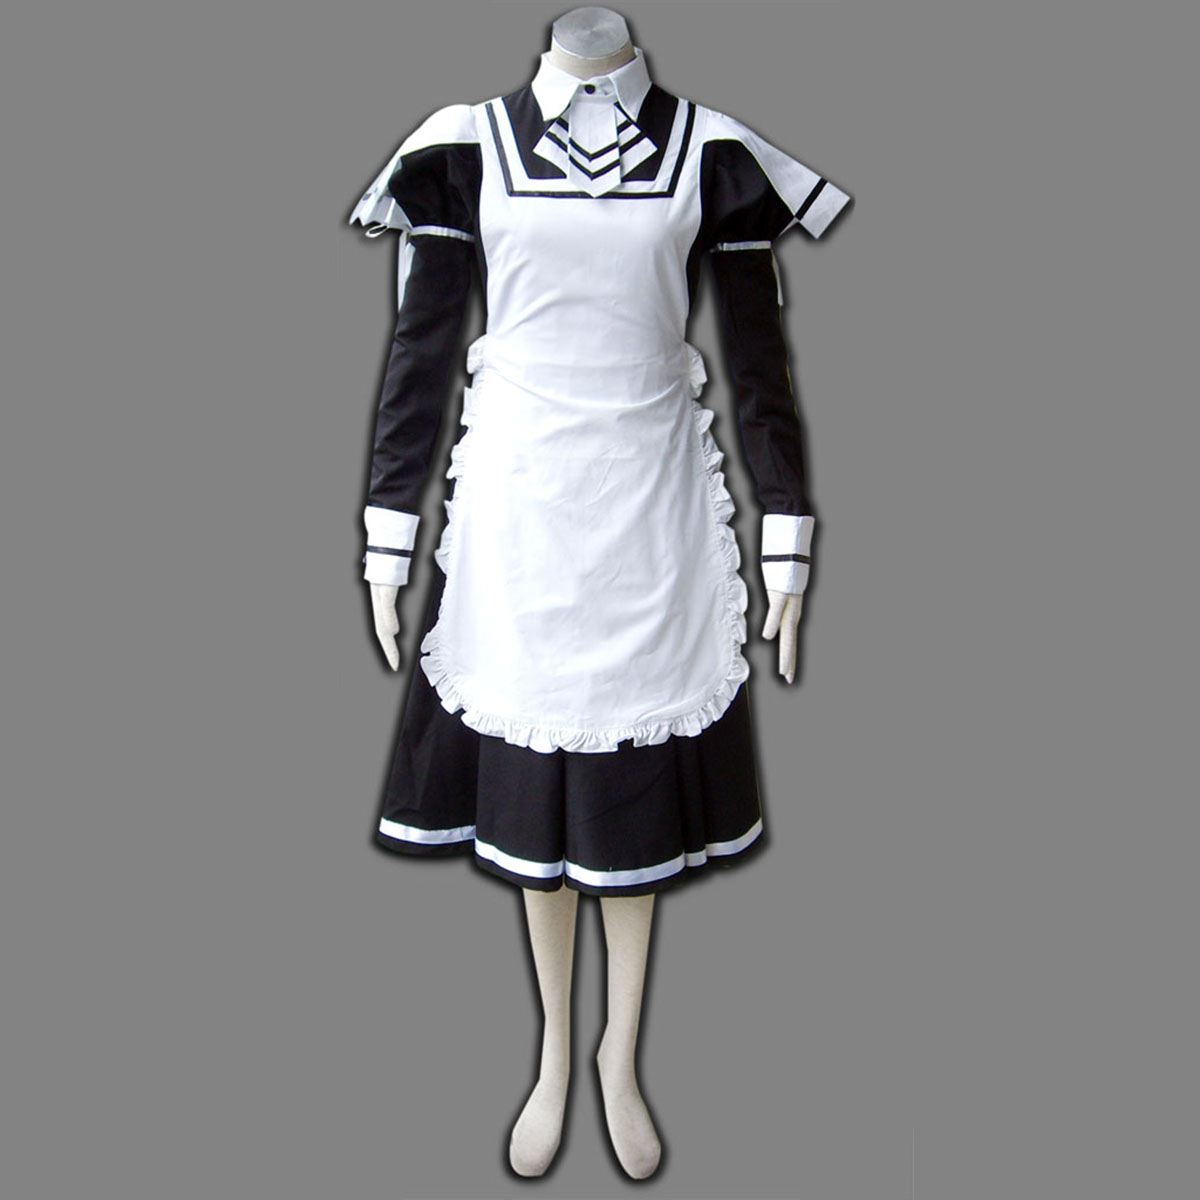 Maid Uniform 7 Deadly Weapon Cosplay Costumes UK